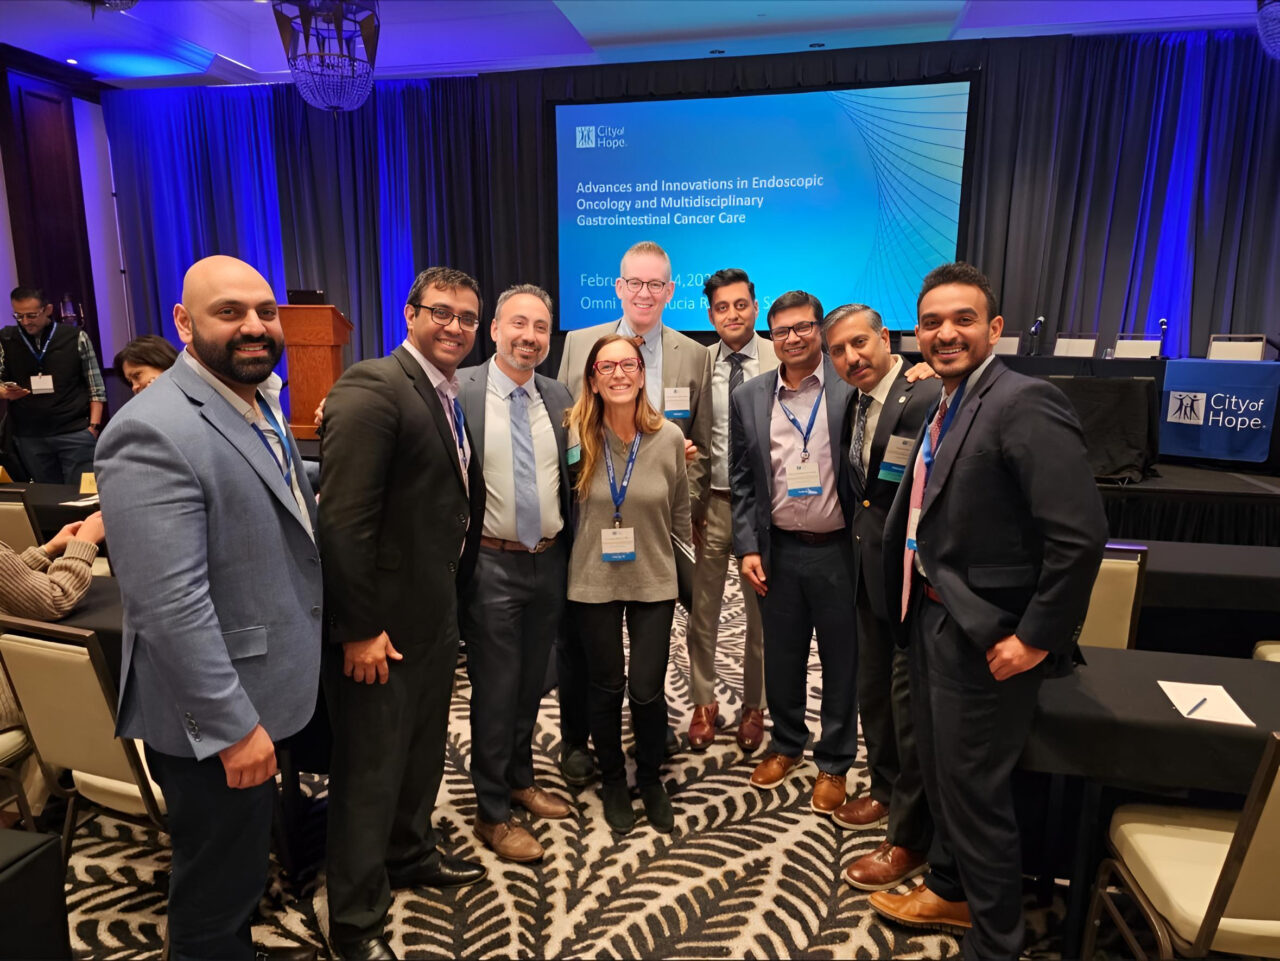 Neil Sharma: Third annual advances in innovations and endoscopic oncology and multidisciplinary gastrointestinal cancer care